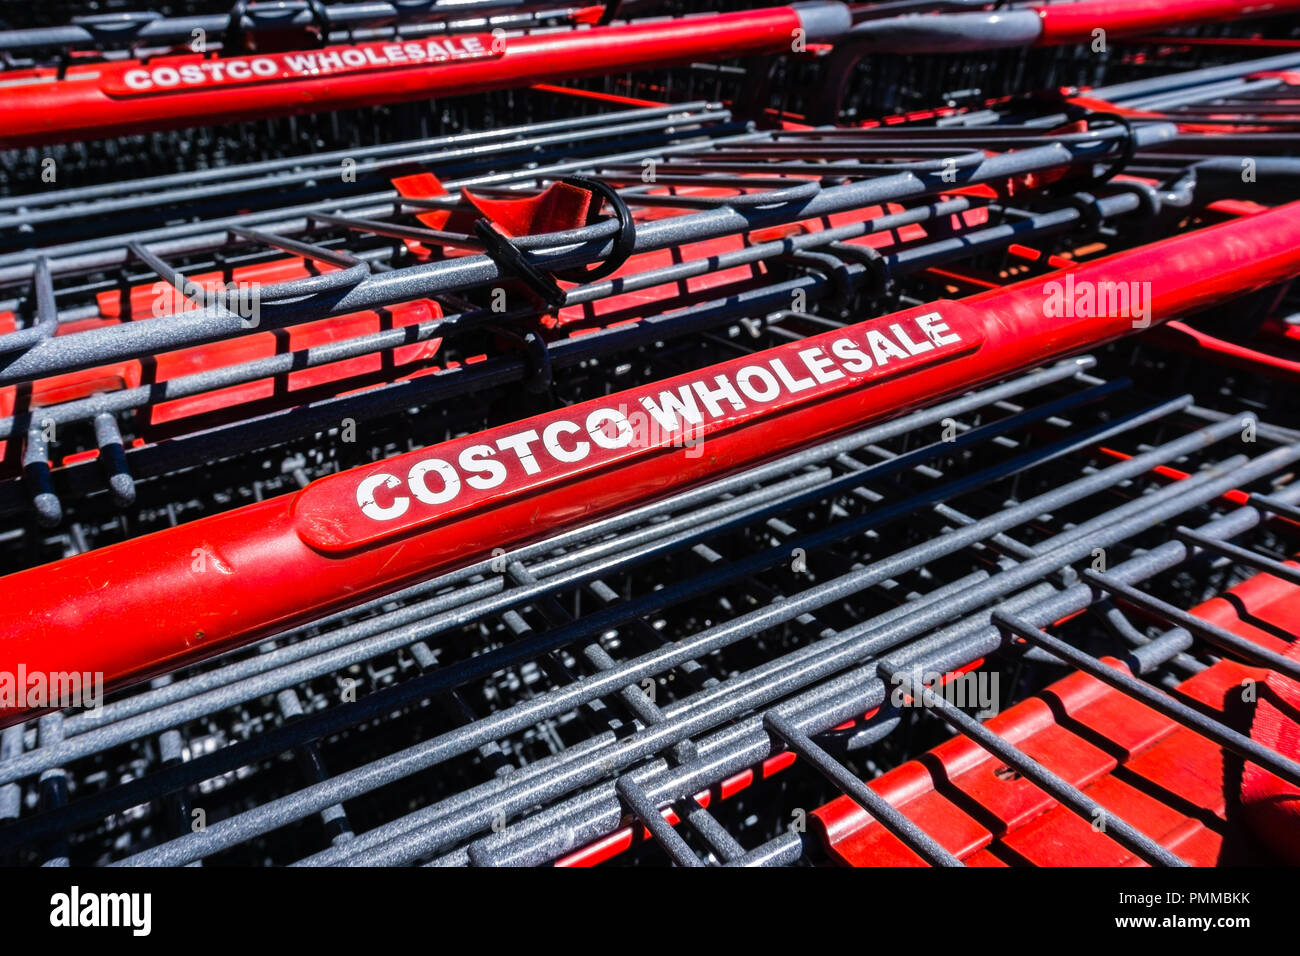 August 6, 2018 Mountain View / CA / USA - Costco Wholesale logo printed on the shopping carts stacked in front of a store in south San Francisco bay Stock Photo